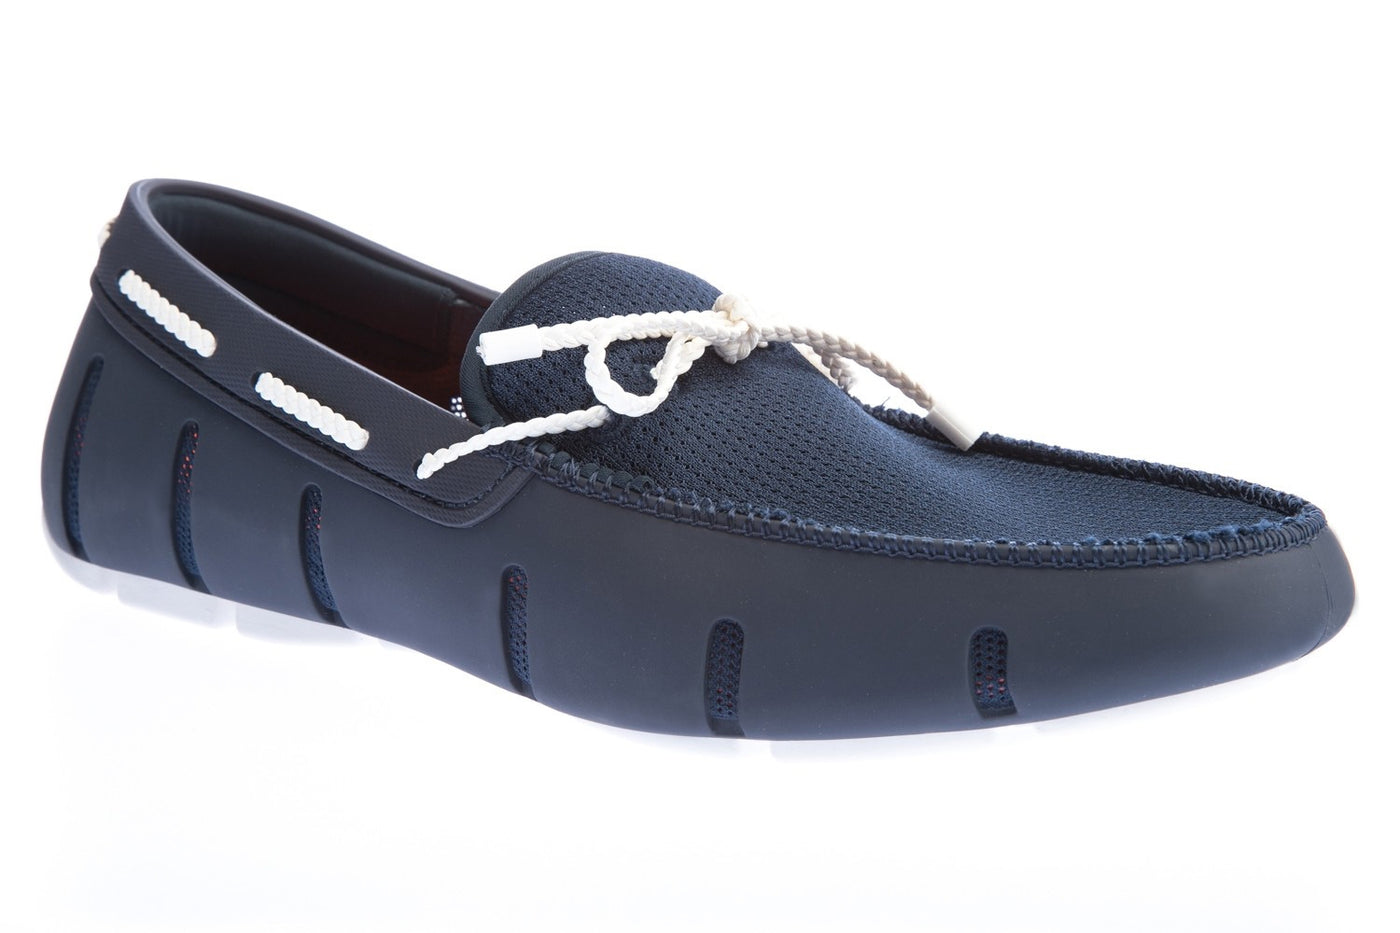 Swims Braided Lace Loafer Shoe in Navy & White Toe